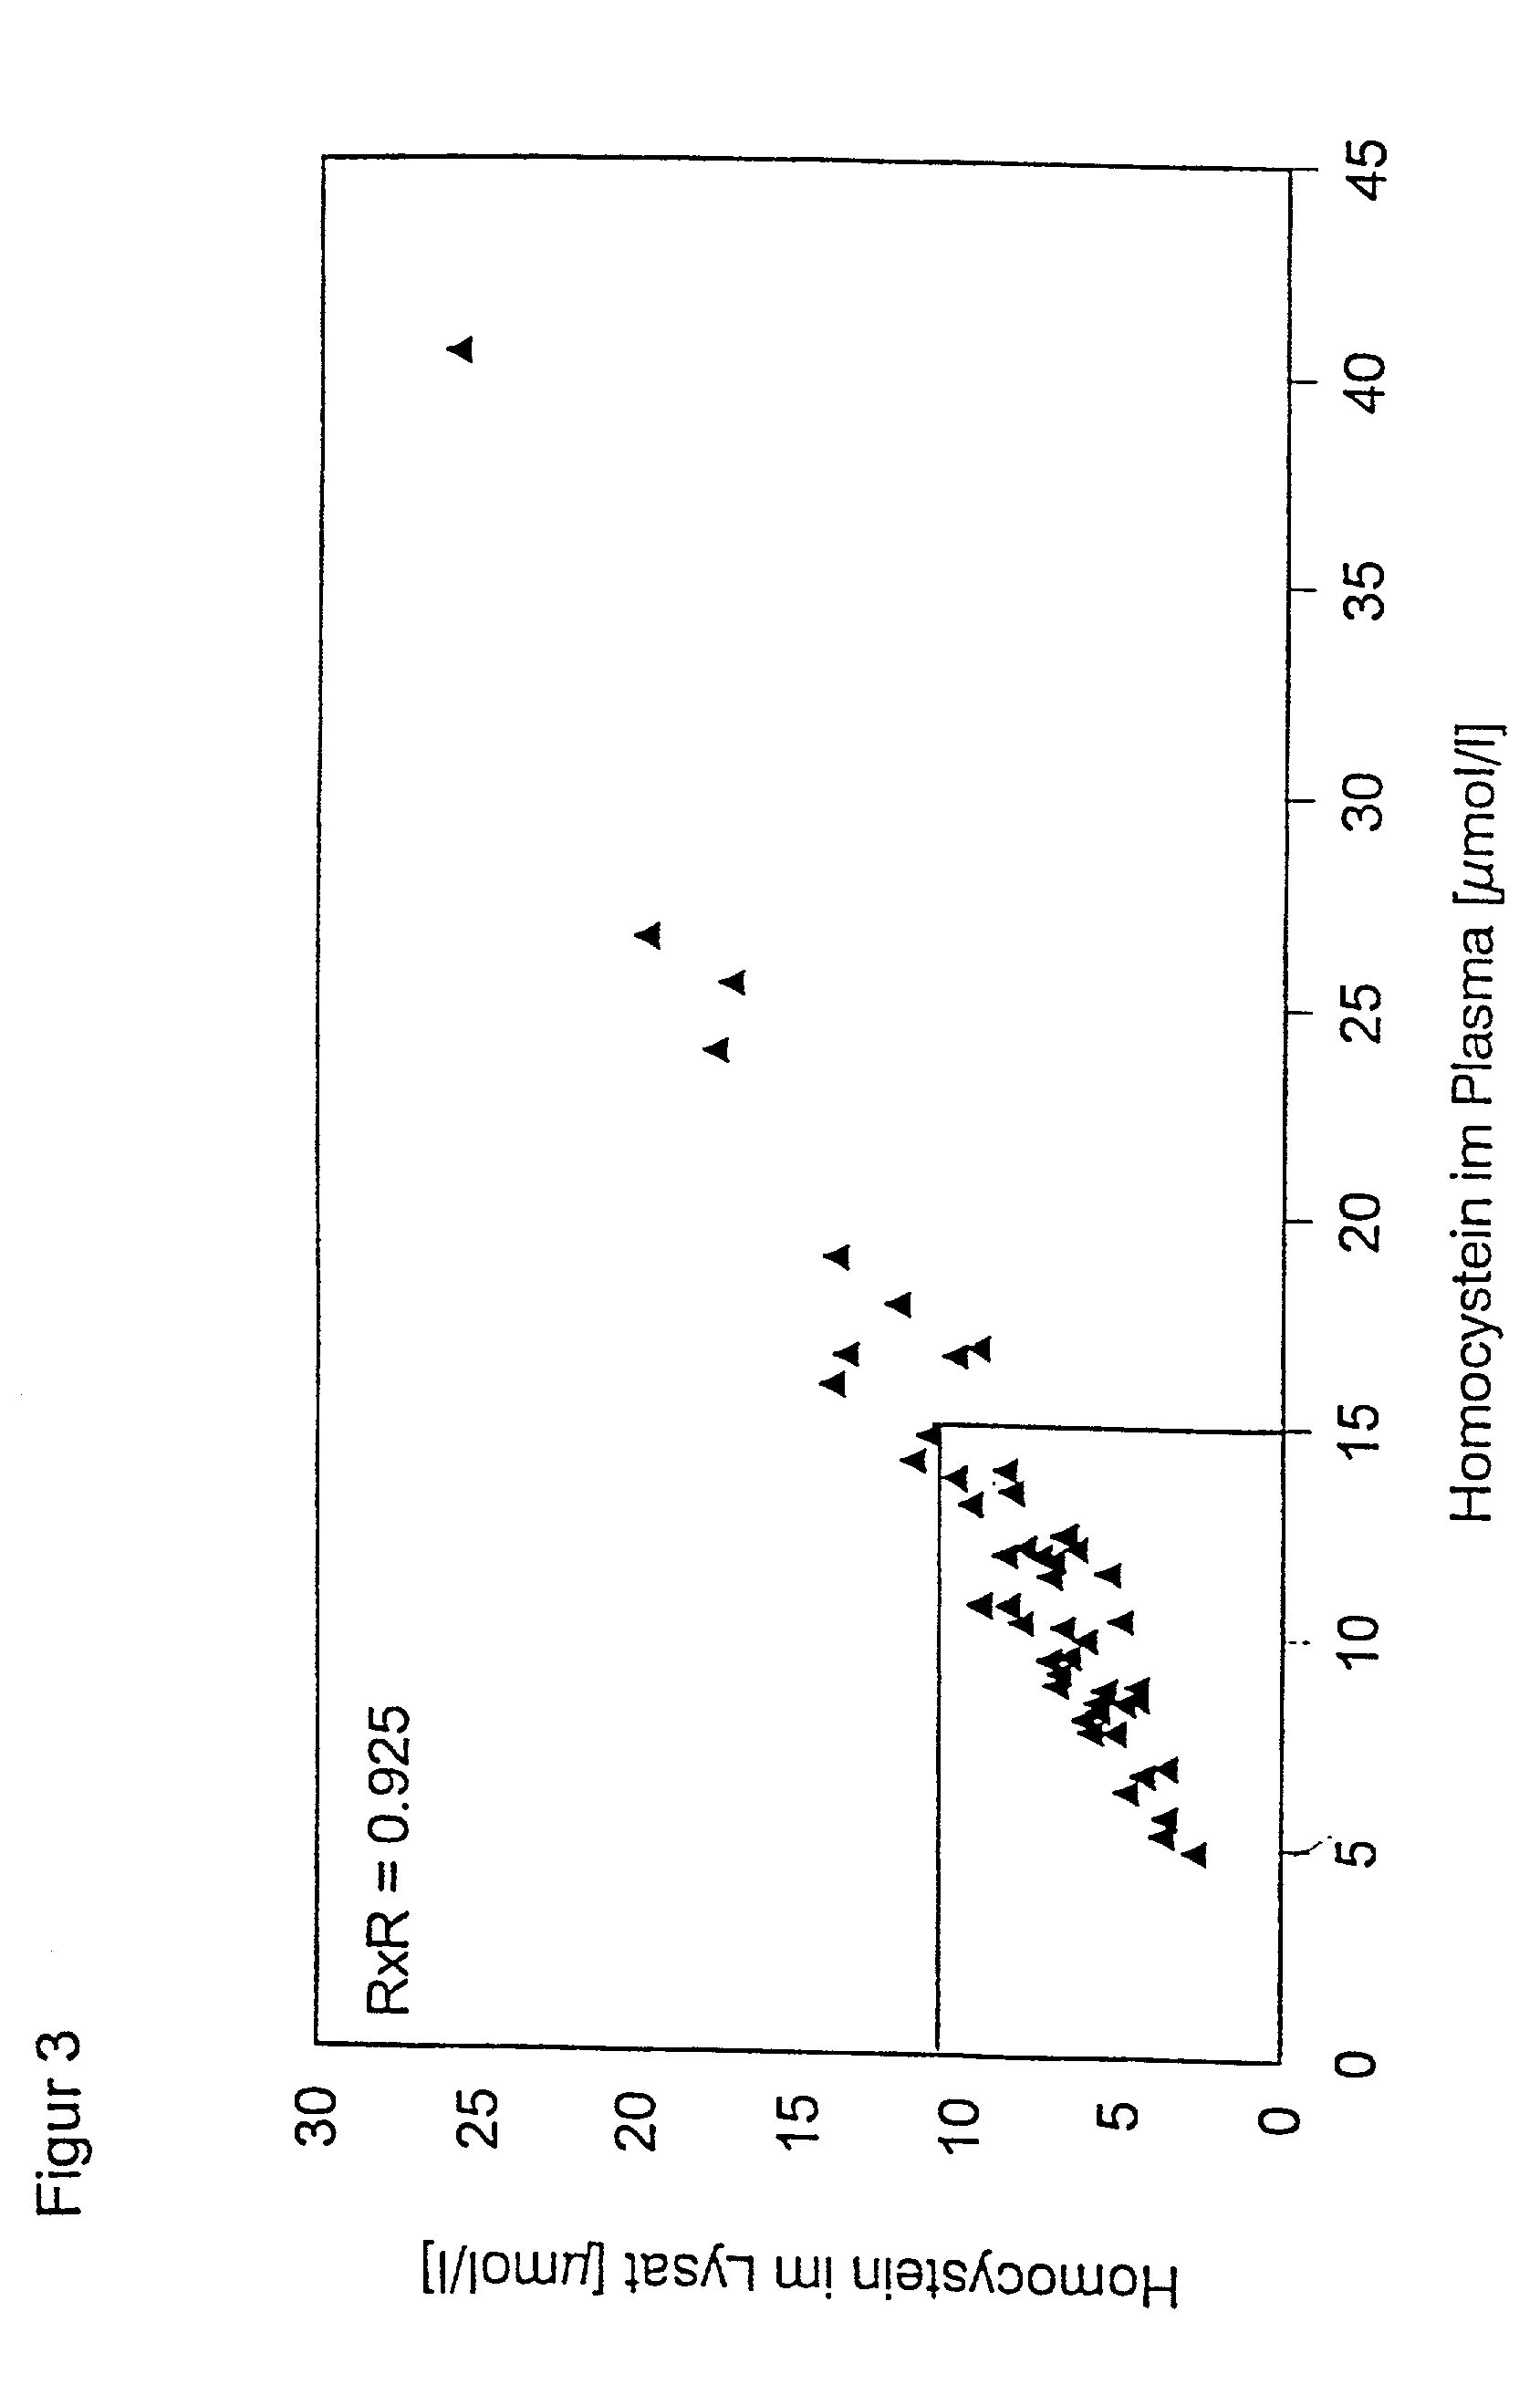 Preparation of blood samples for detecting homocysteine and/or folate